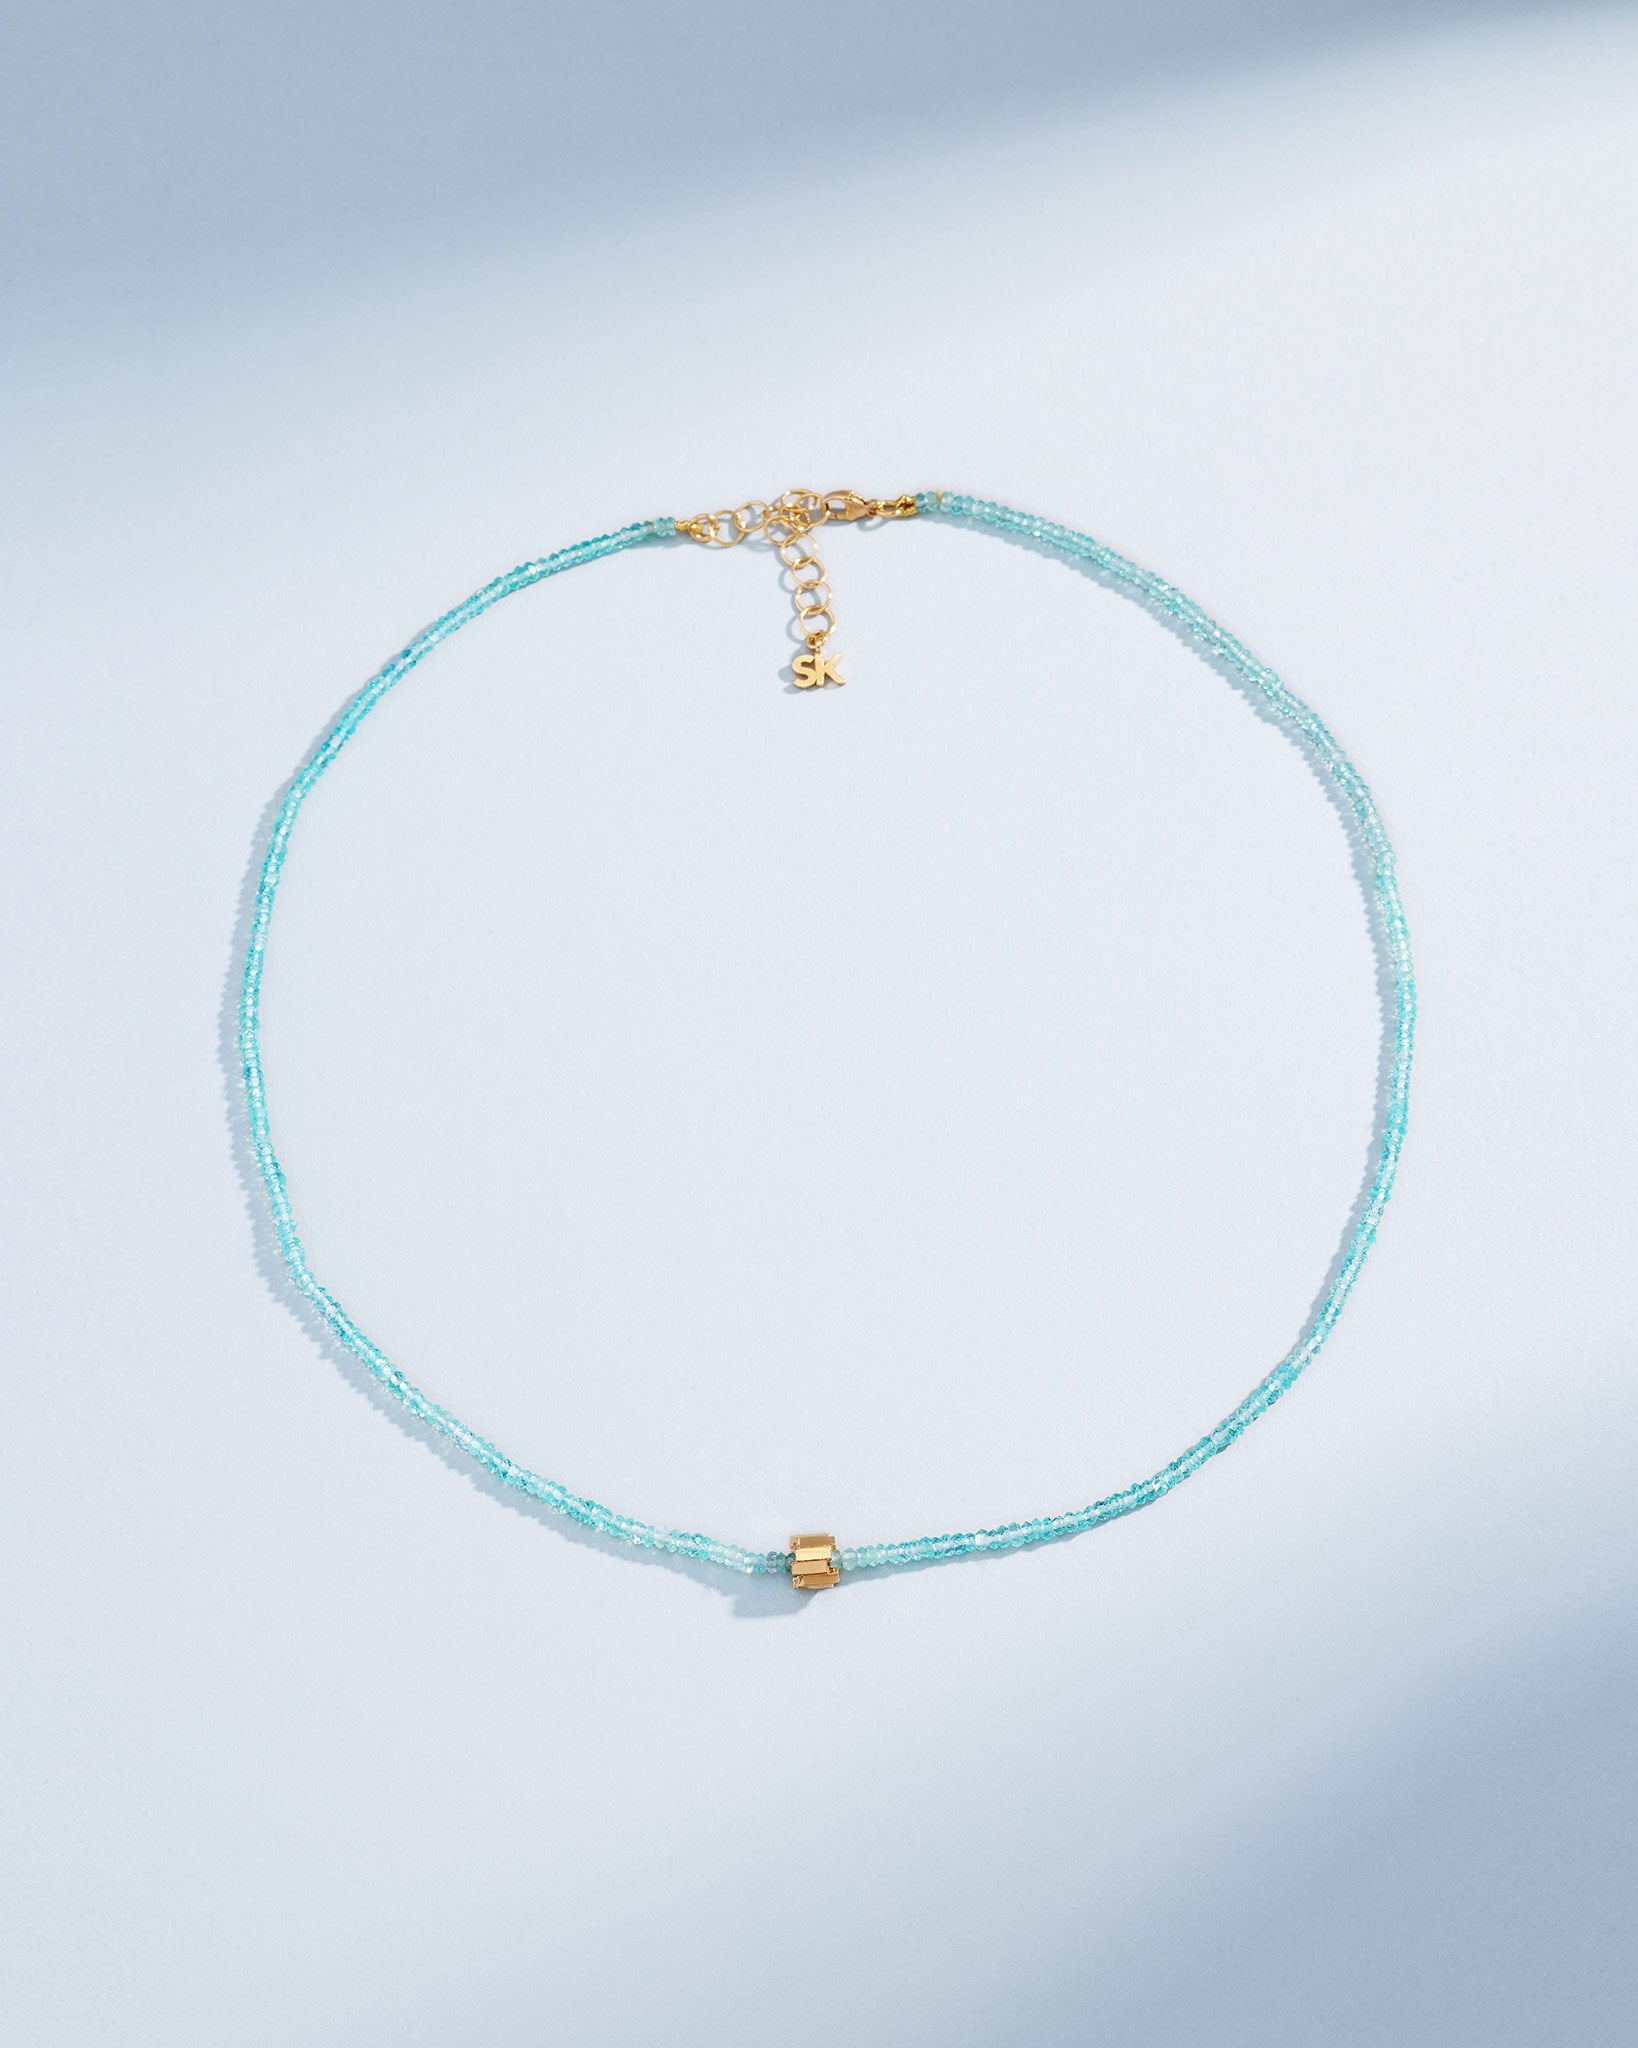 Suzanne Kalan Infinite Beaded Apatite & Mini Golden Rondelle Necklace in 18k yellow gold